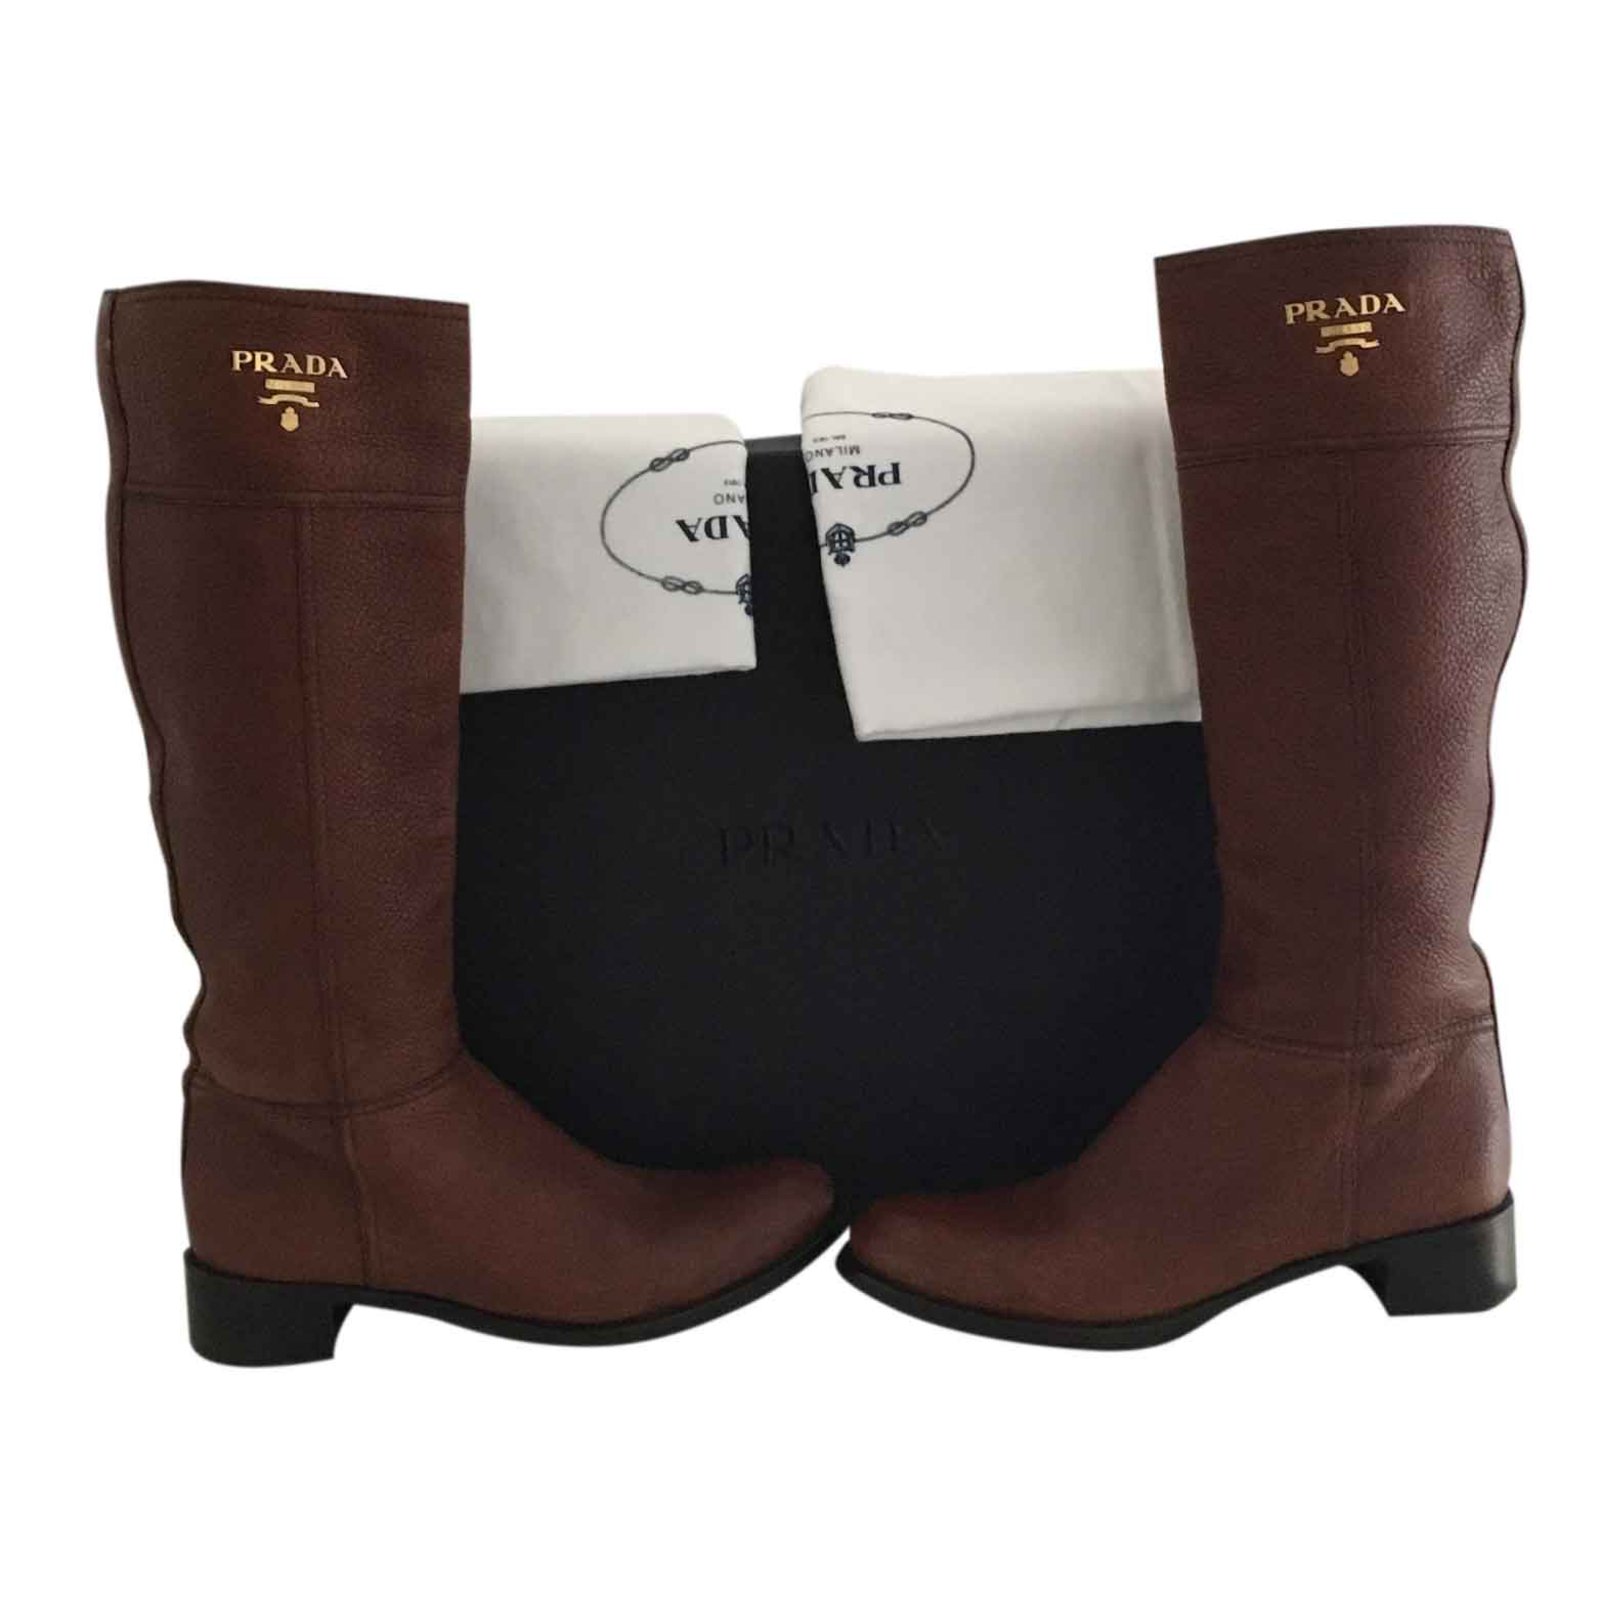 prada brown leather boots